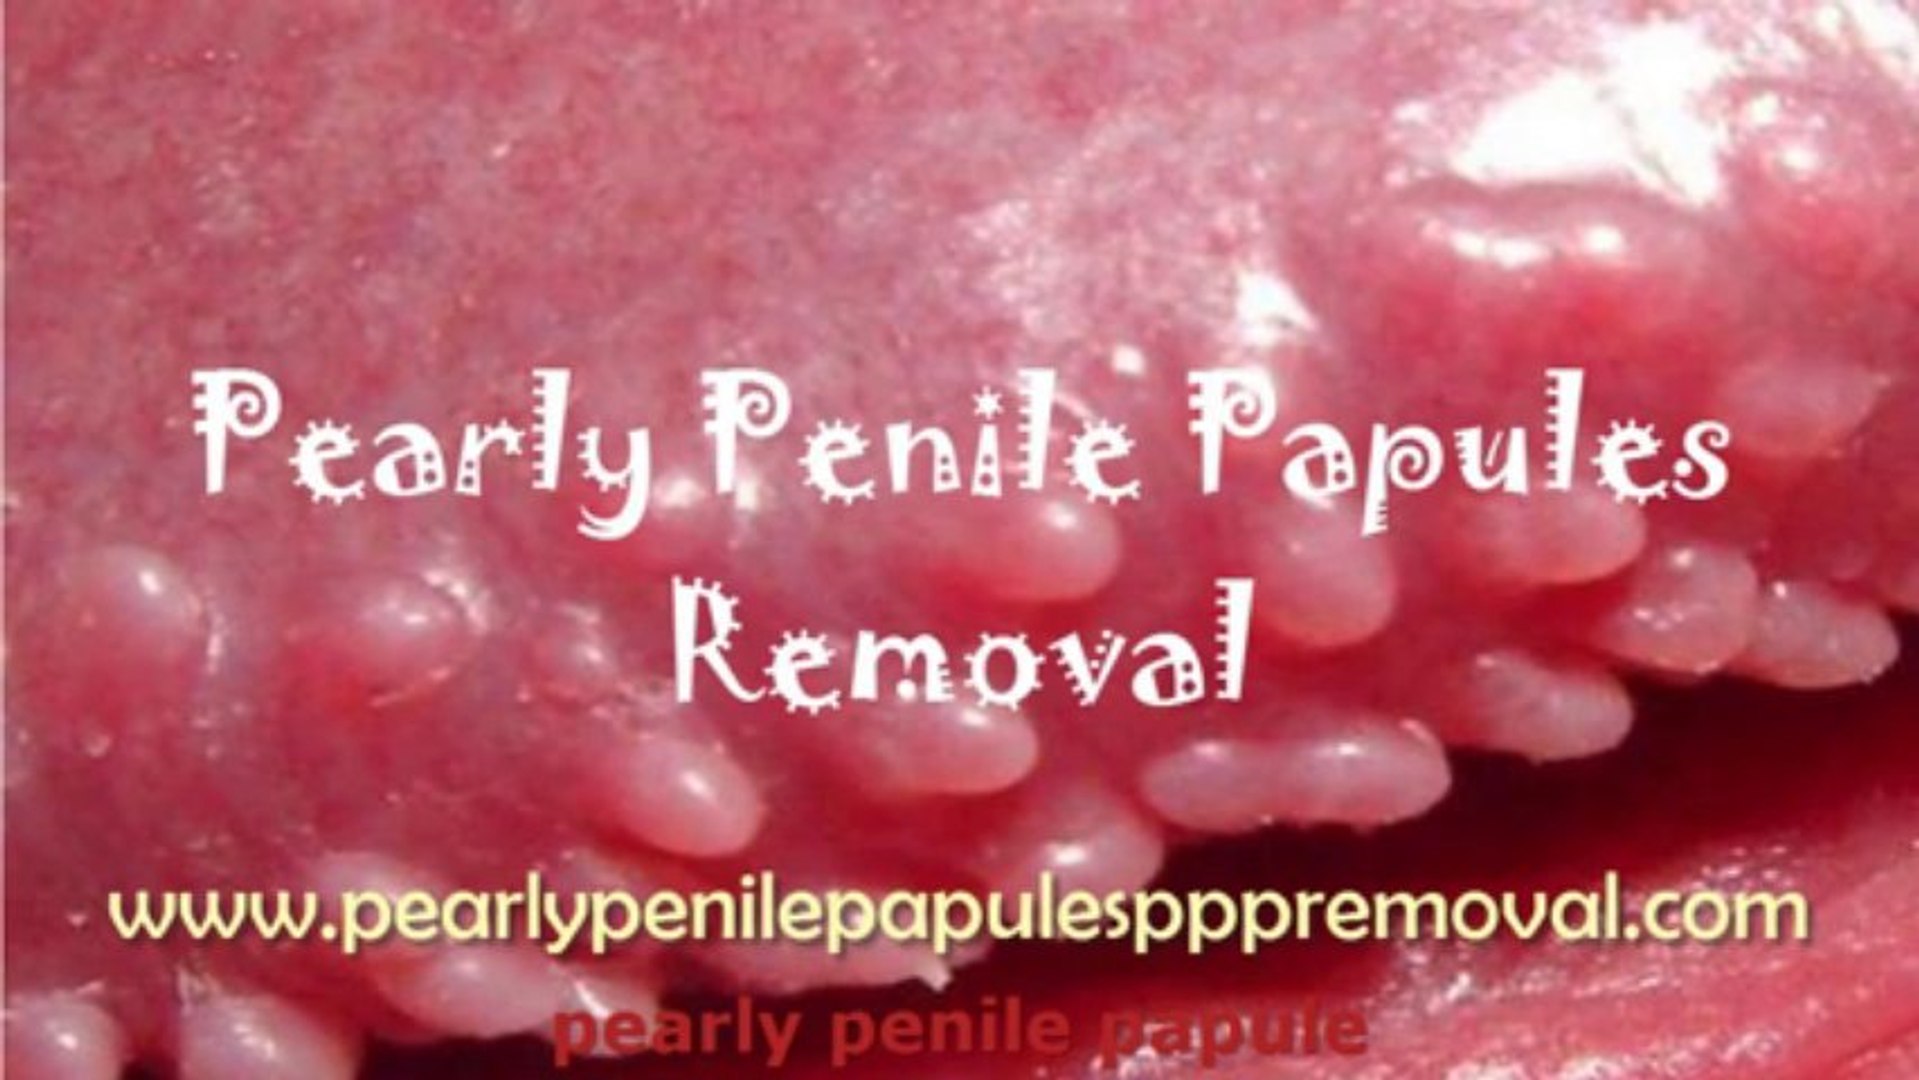 On shaft papules penile Causes, Remedies